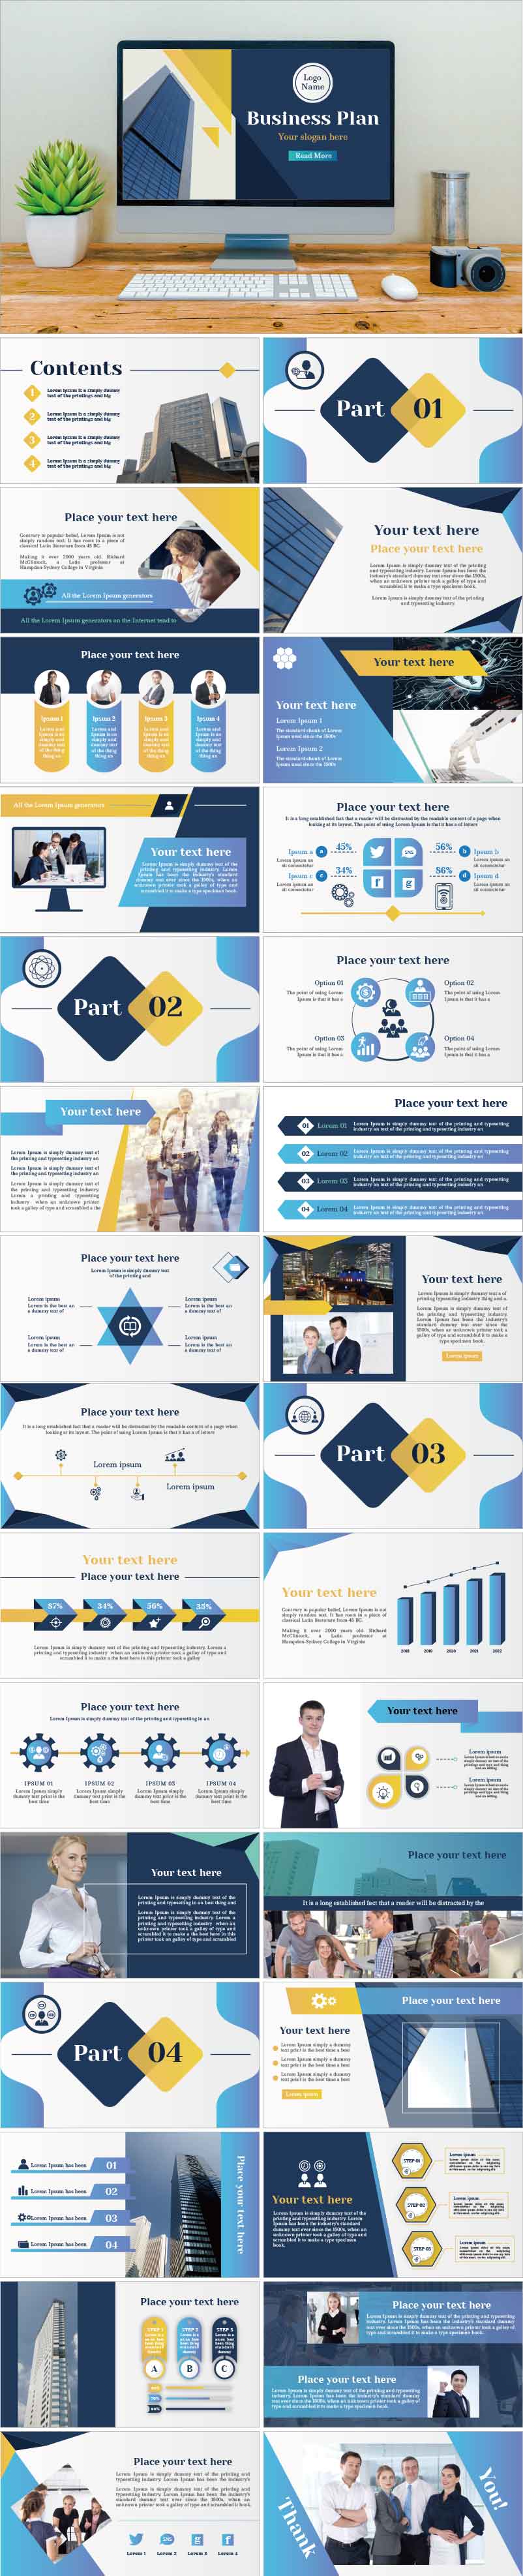 PowerPoint template vol.41